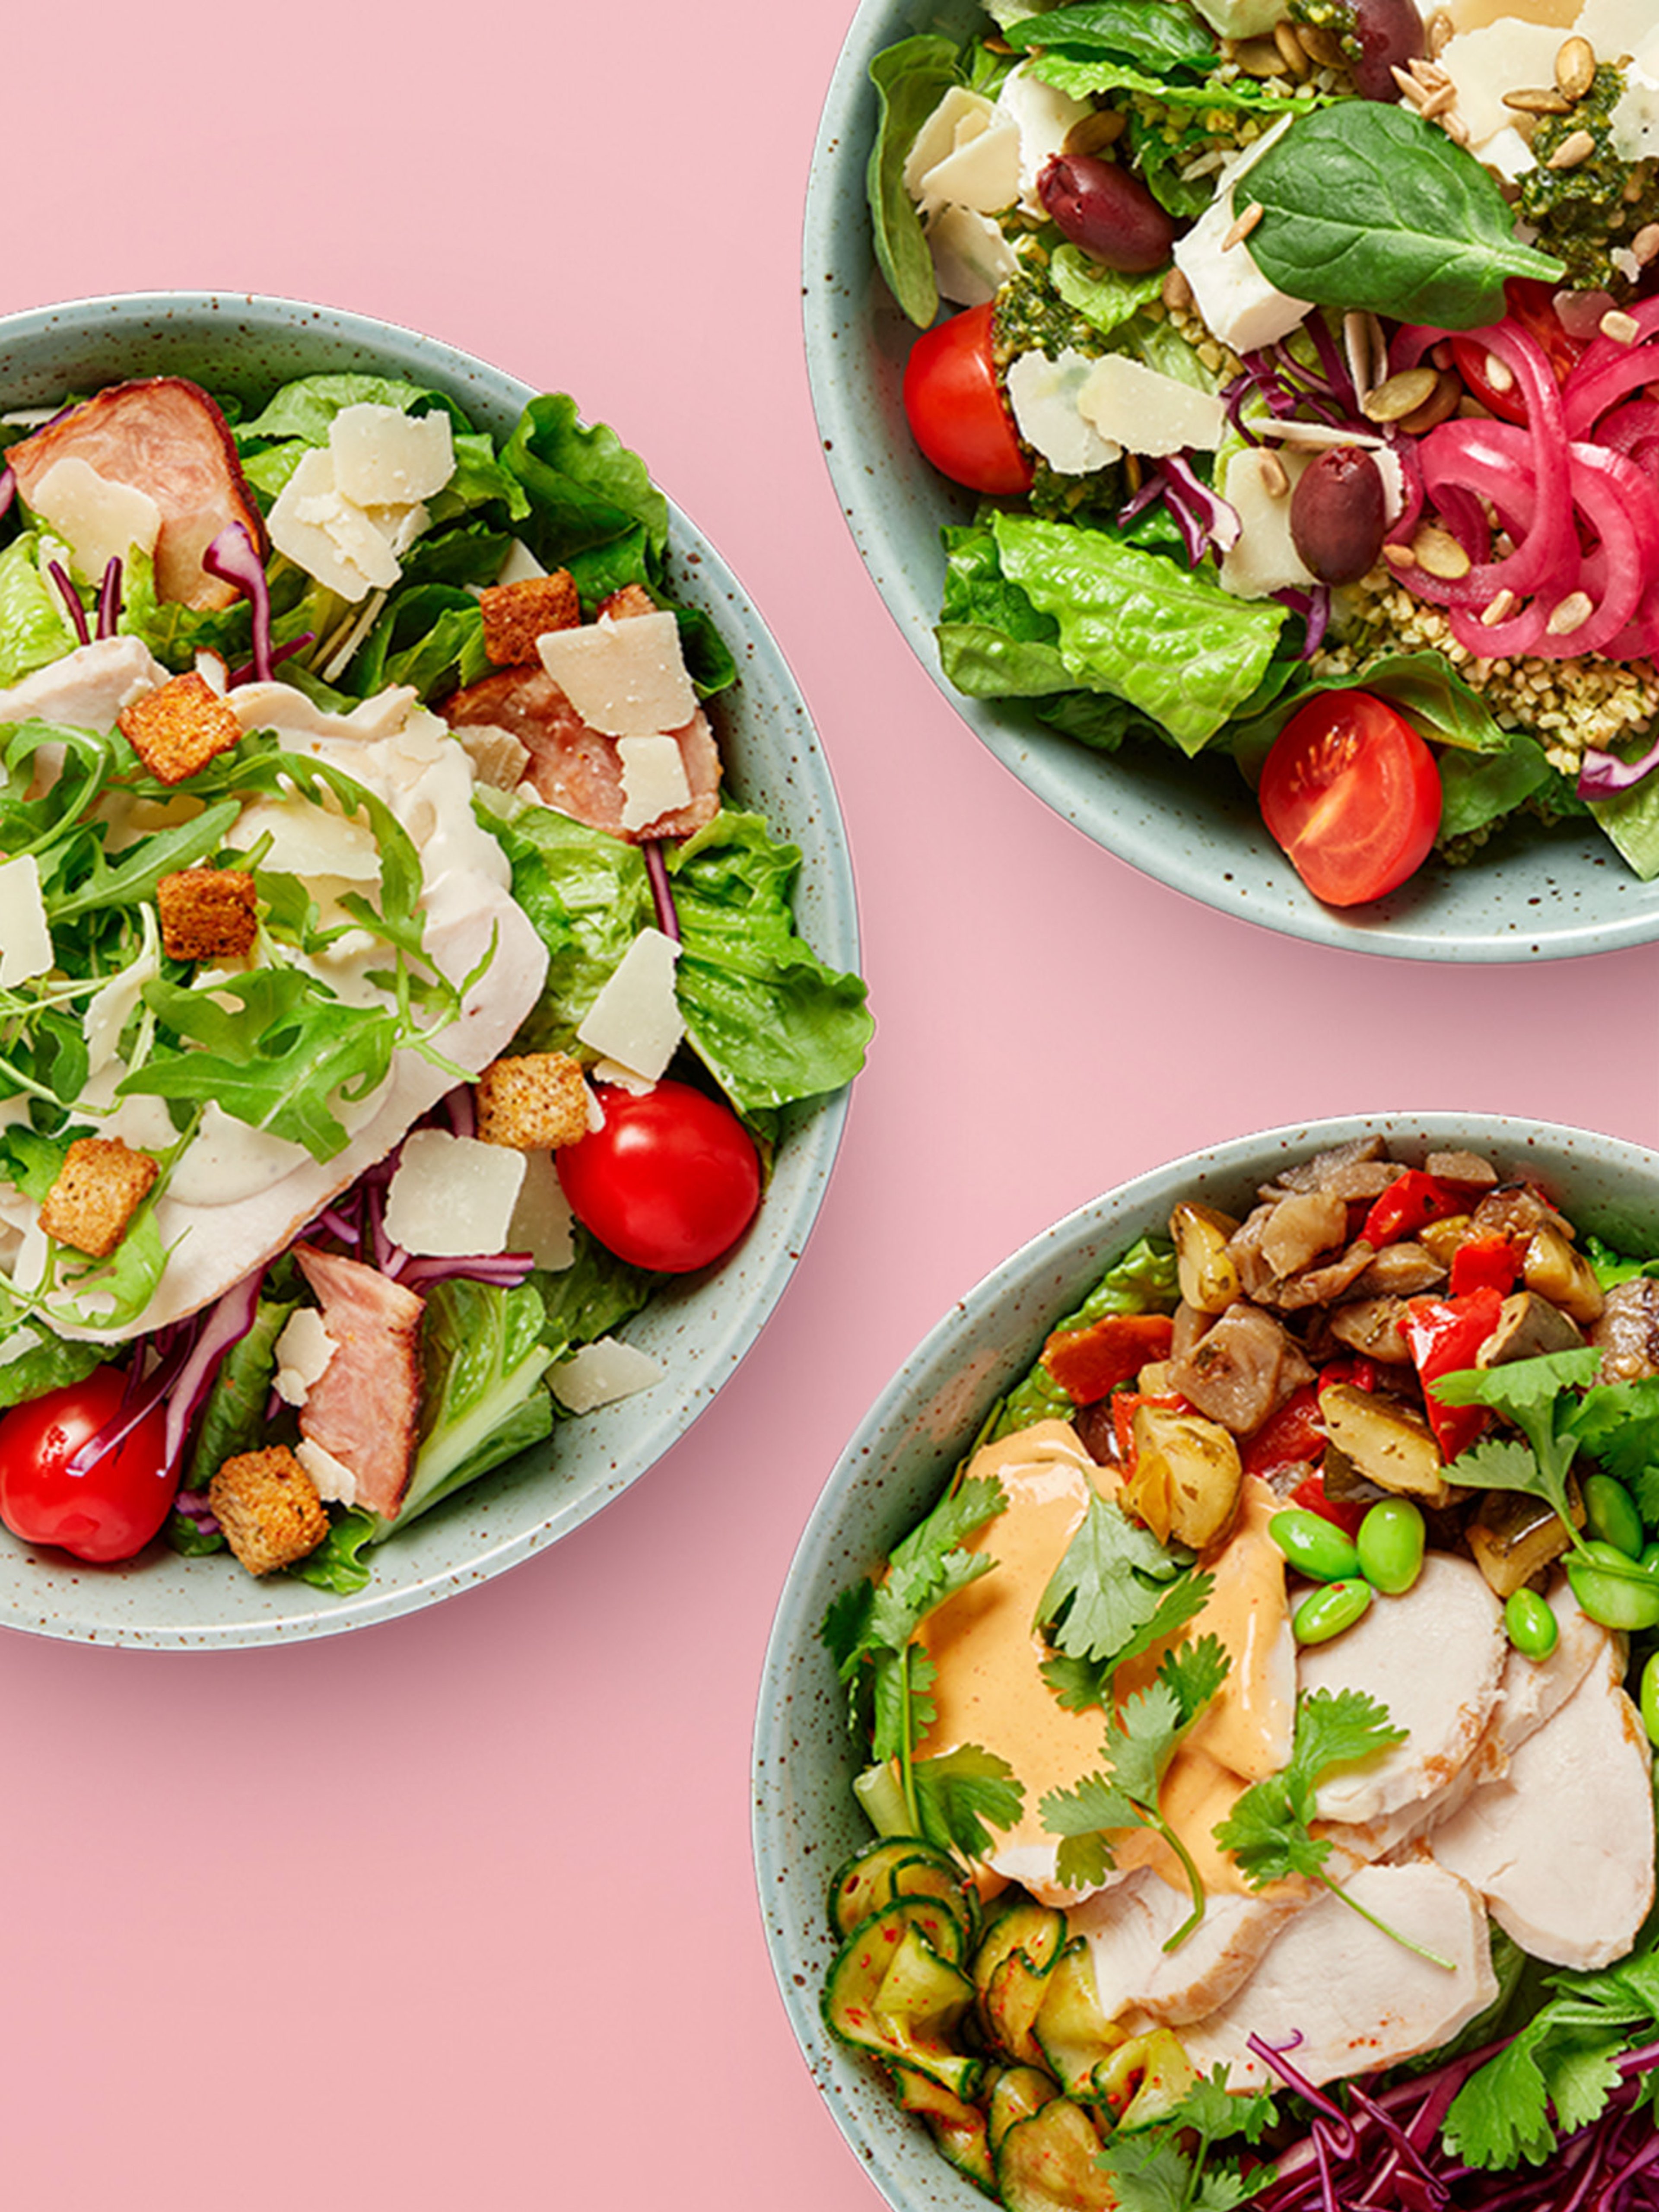 Try our new salads!